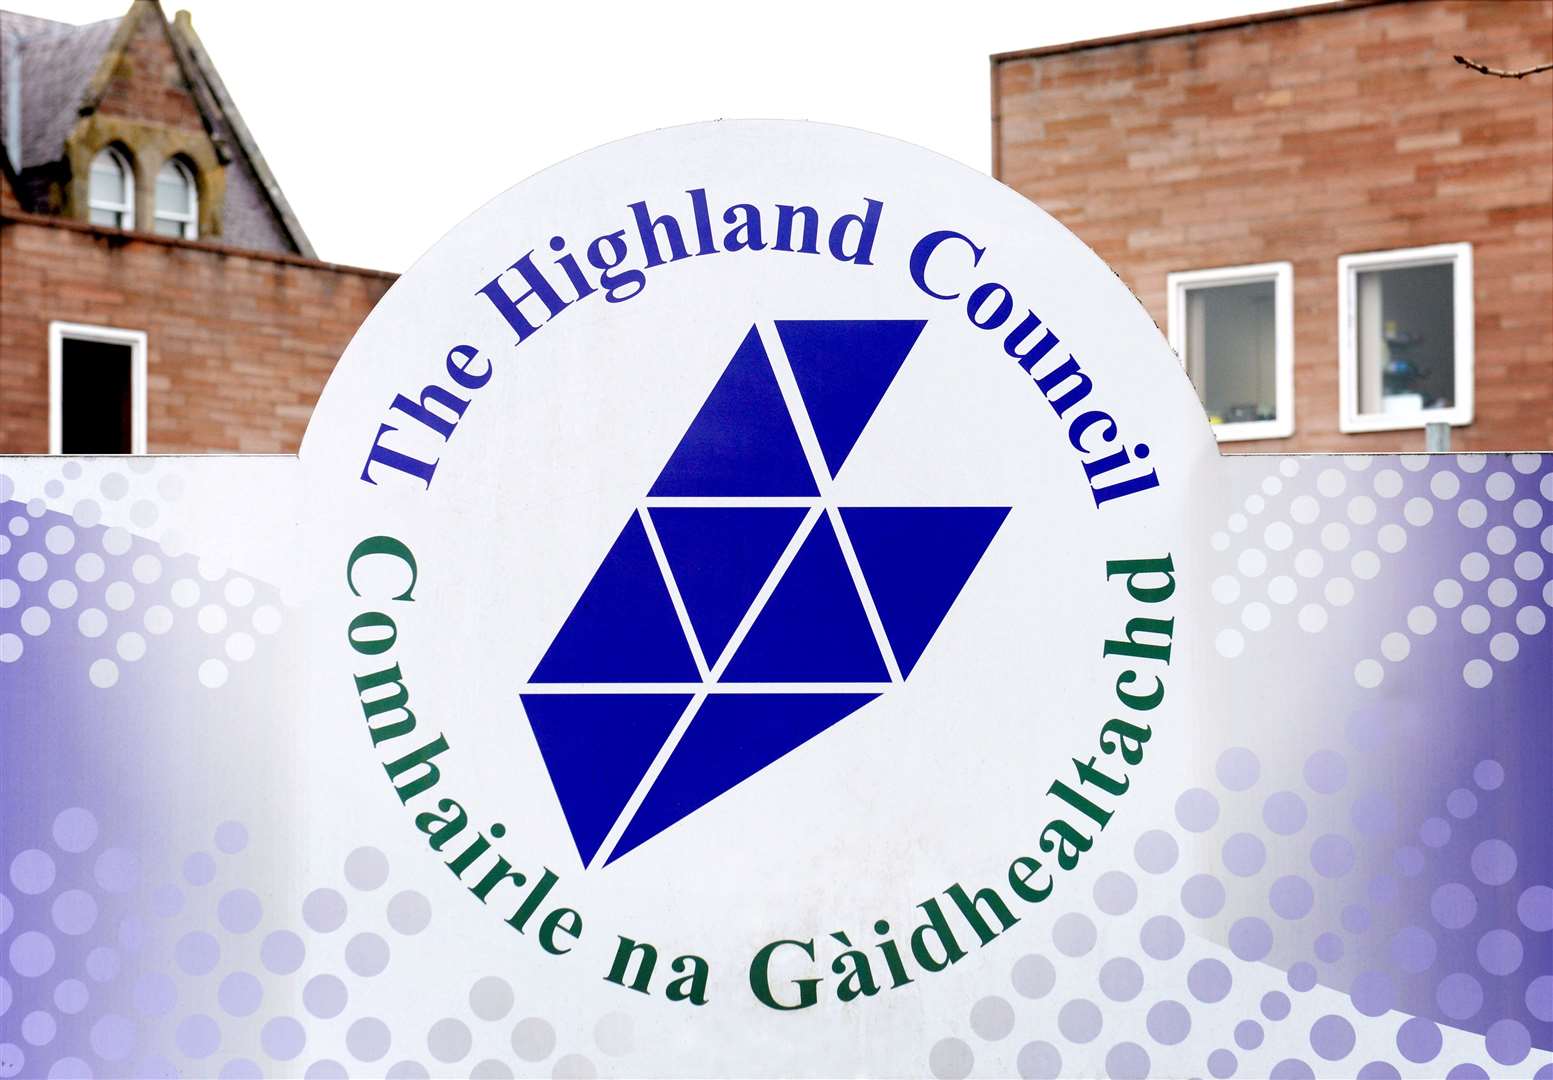 Highland Council is looking to purchase homes to add to its housing stock.